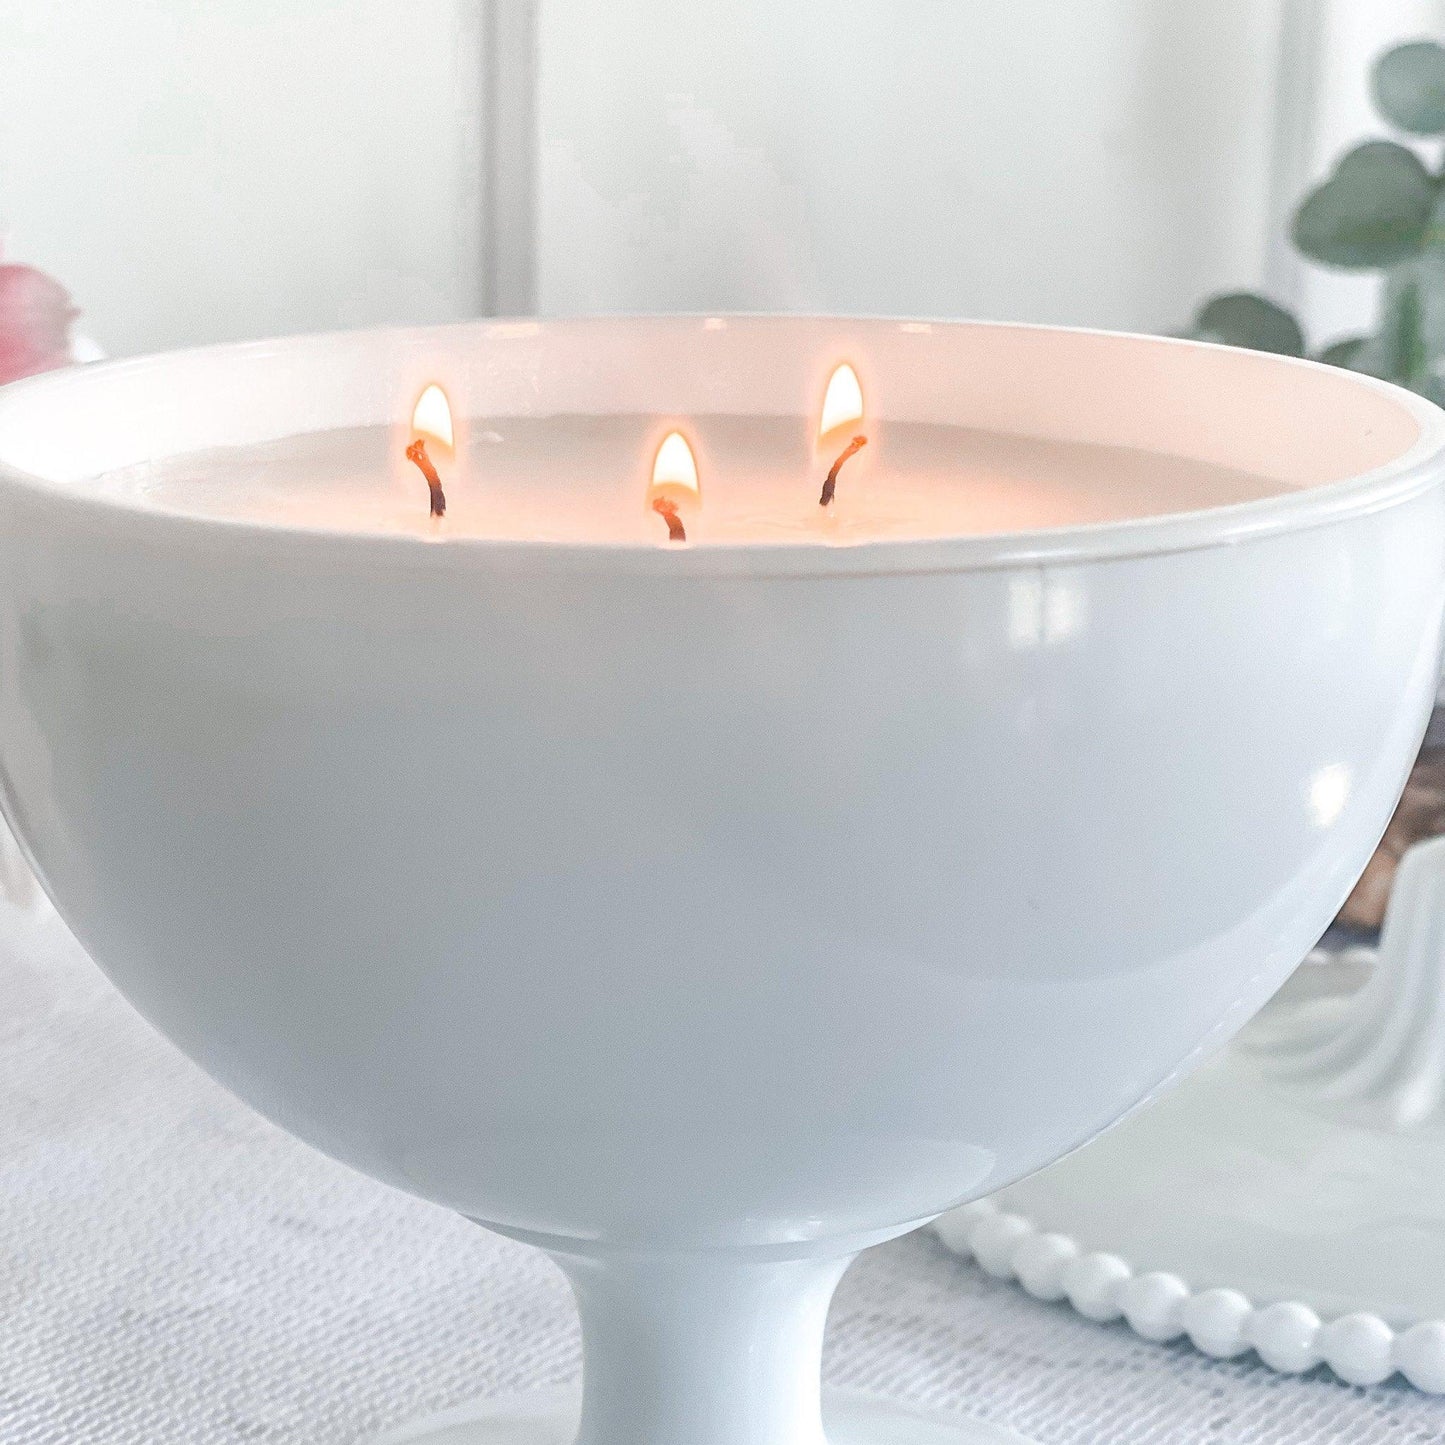 Unique Candle in Vintage Candy Dish with Lid - RetroWix 